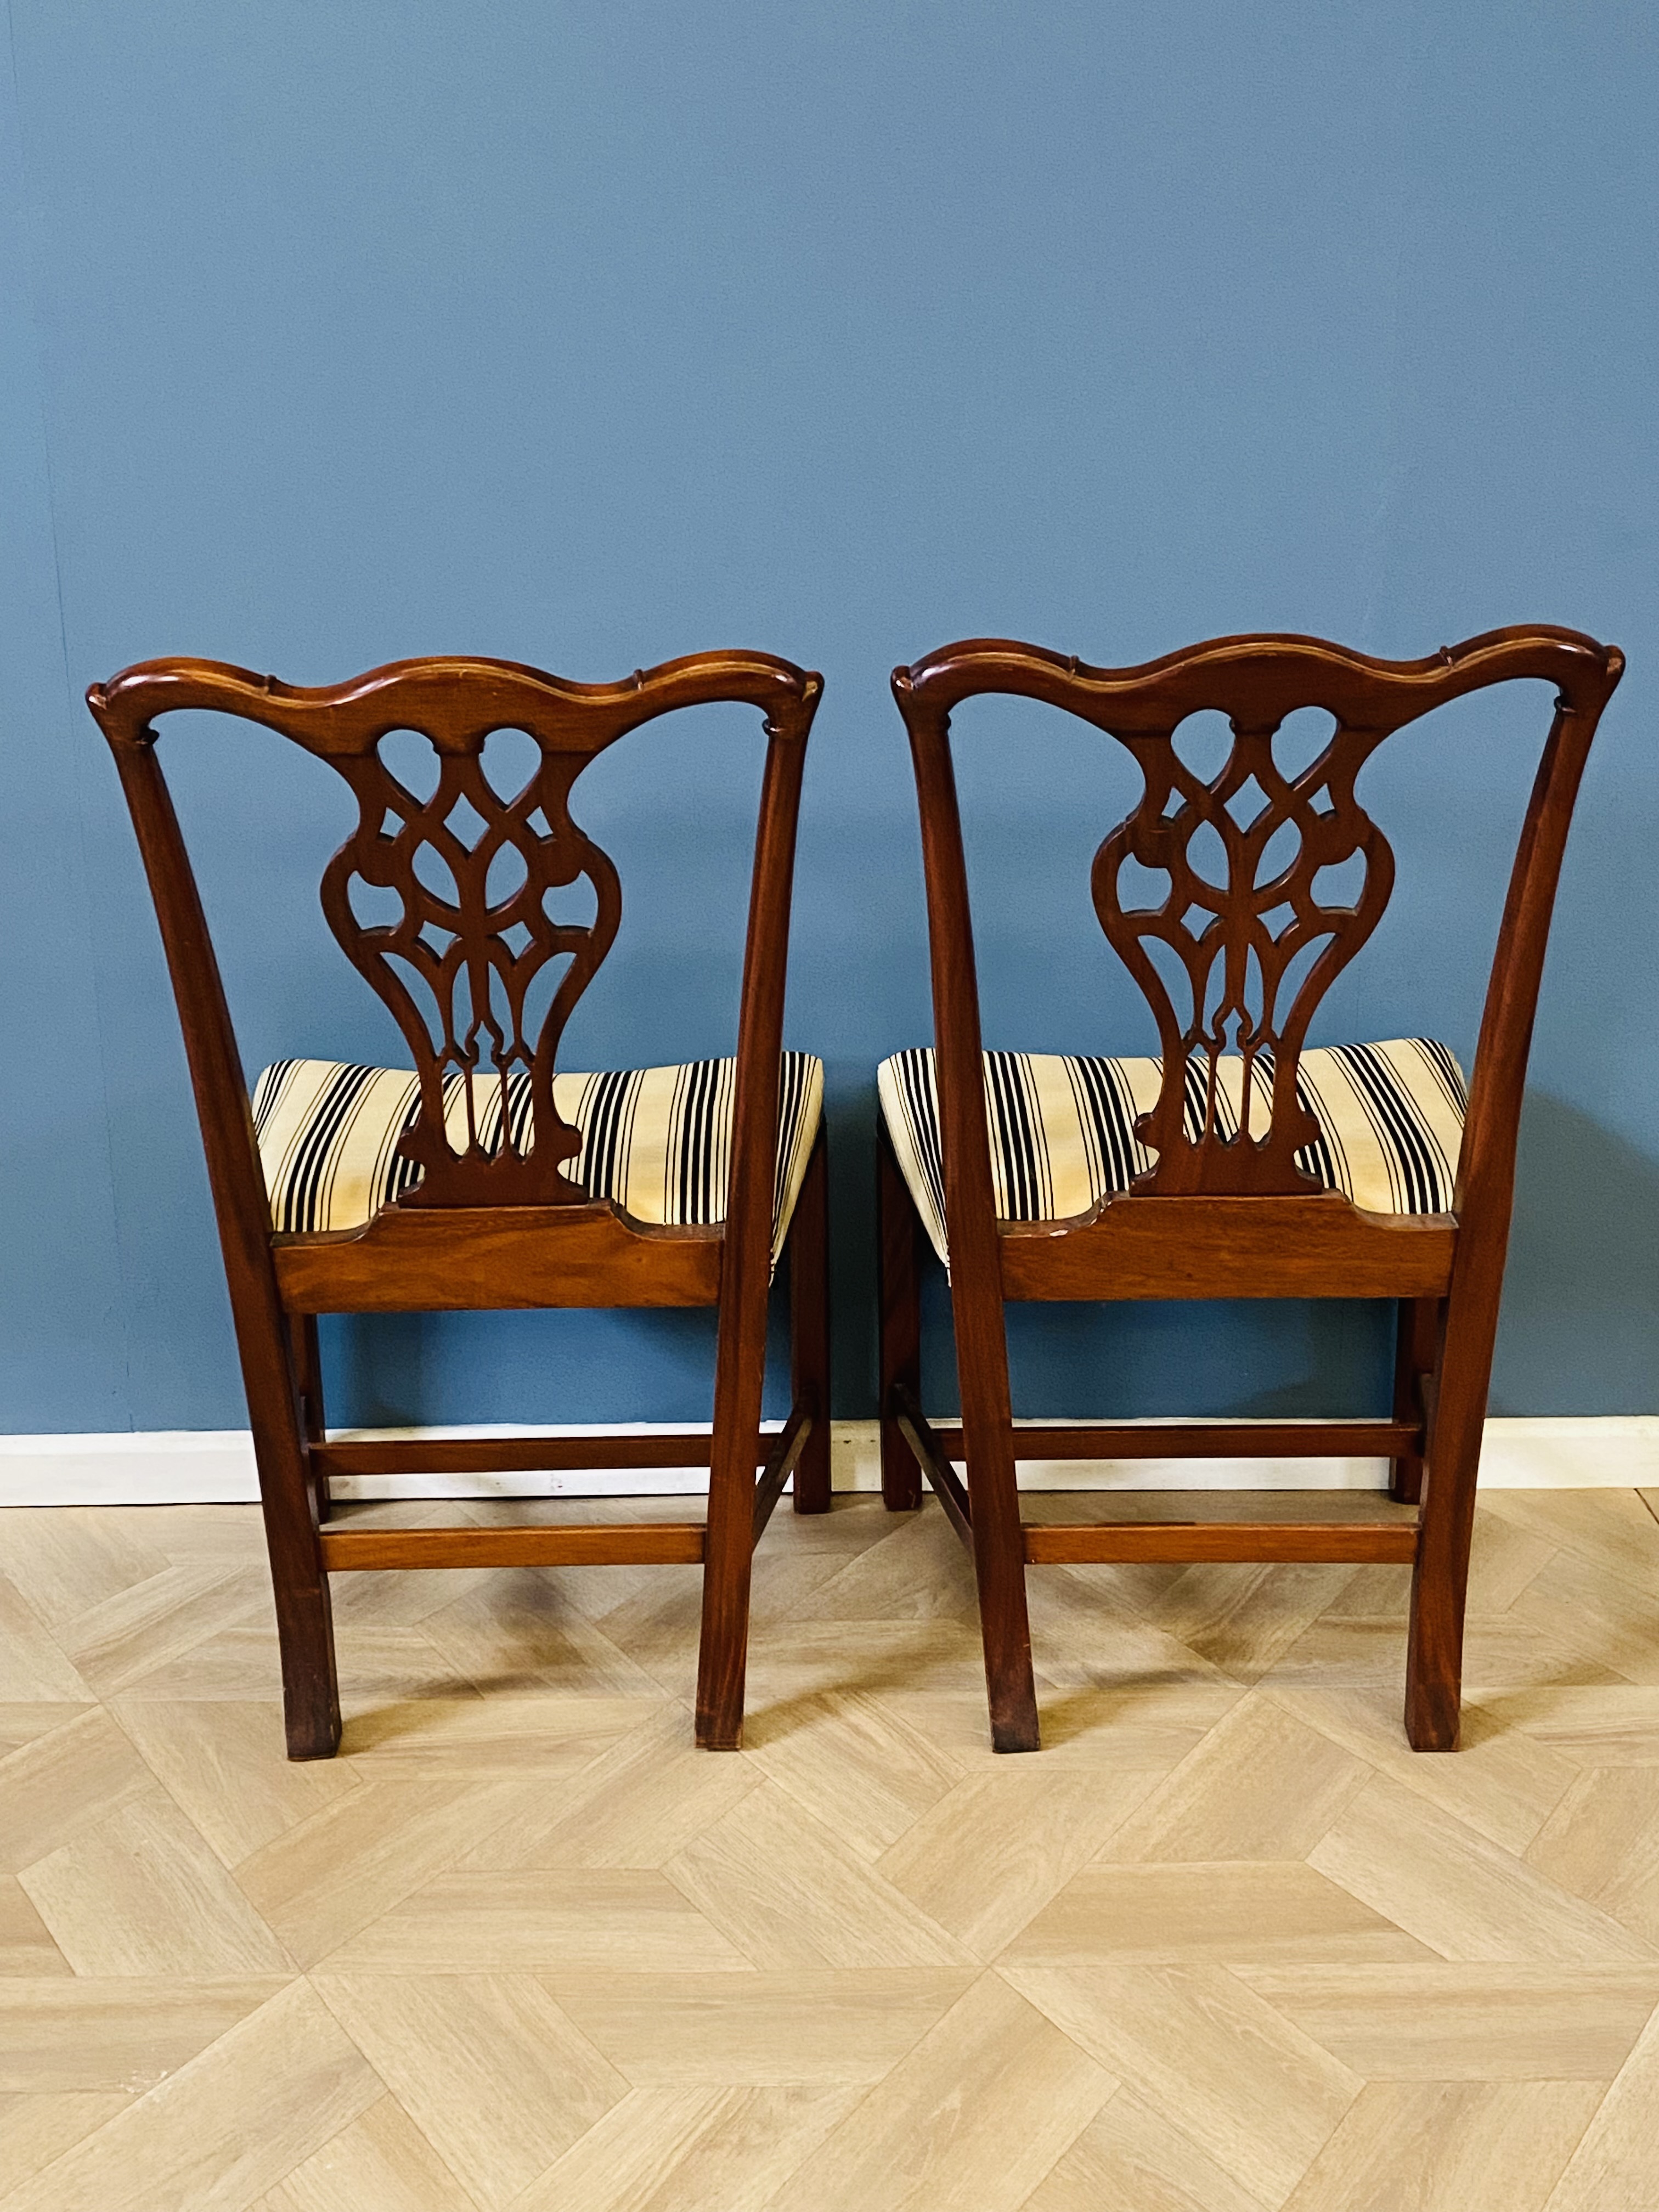 Pair of mahogany Chippendale style side chairs - Image 4 of 5